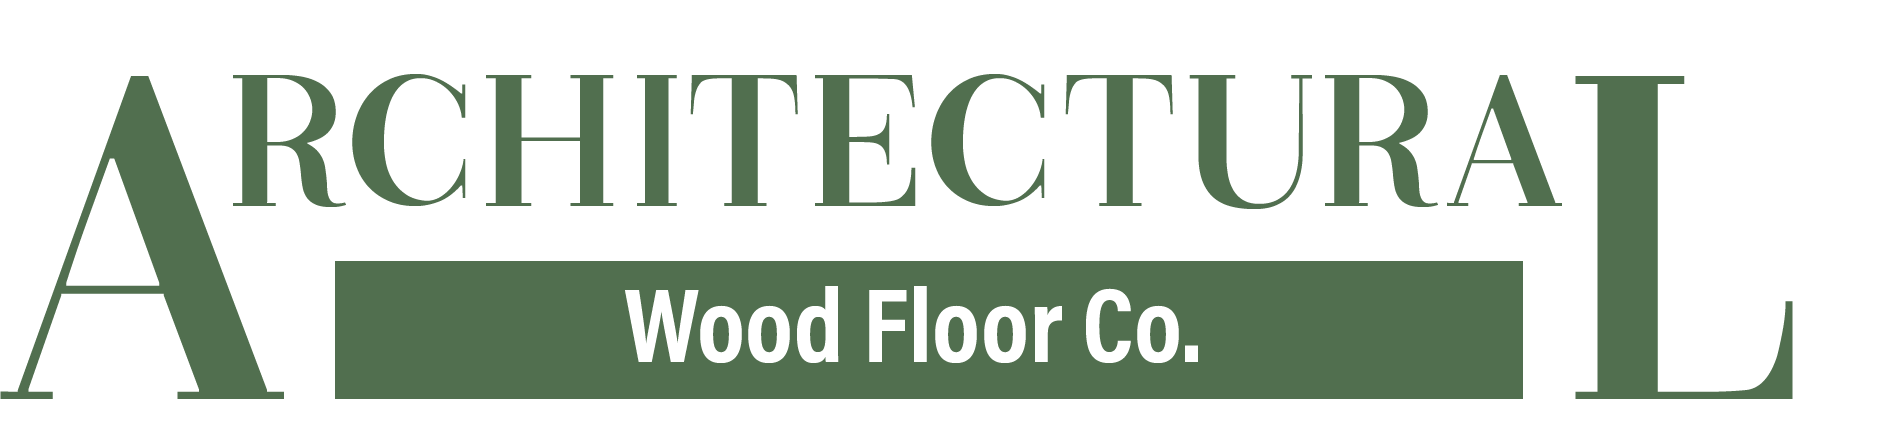 Architectural Wood Floor Co. logo